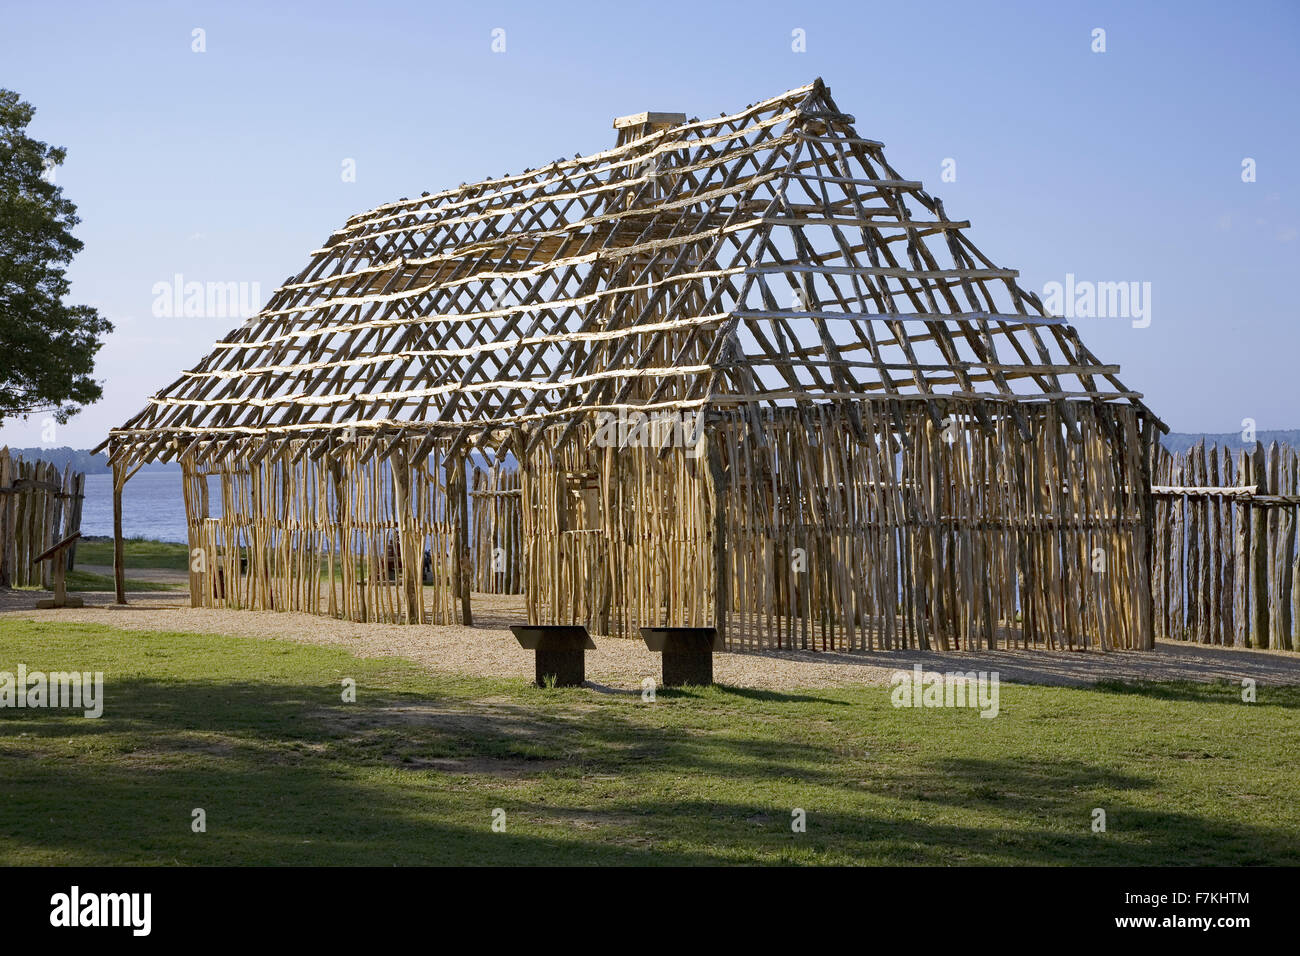 Re-creation of early Jamestown structure at James Fort on Jamestown Island, America's Birthplace, the place of the first permanent English colony in America, May 13, 1607. Stock Photo